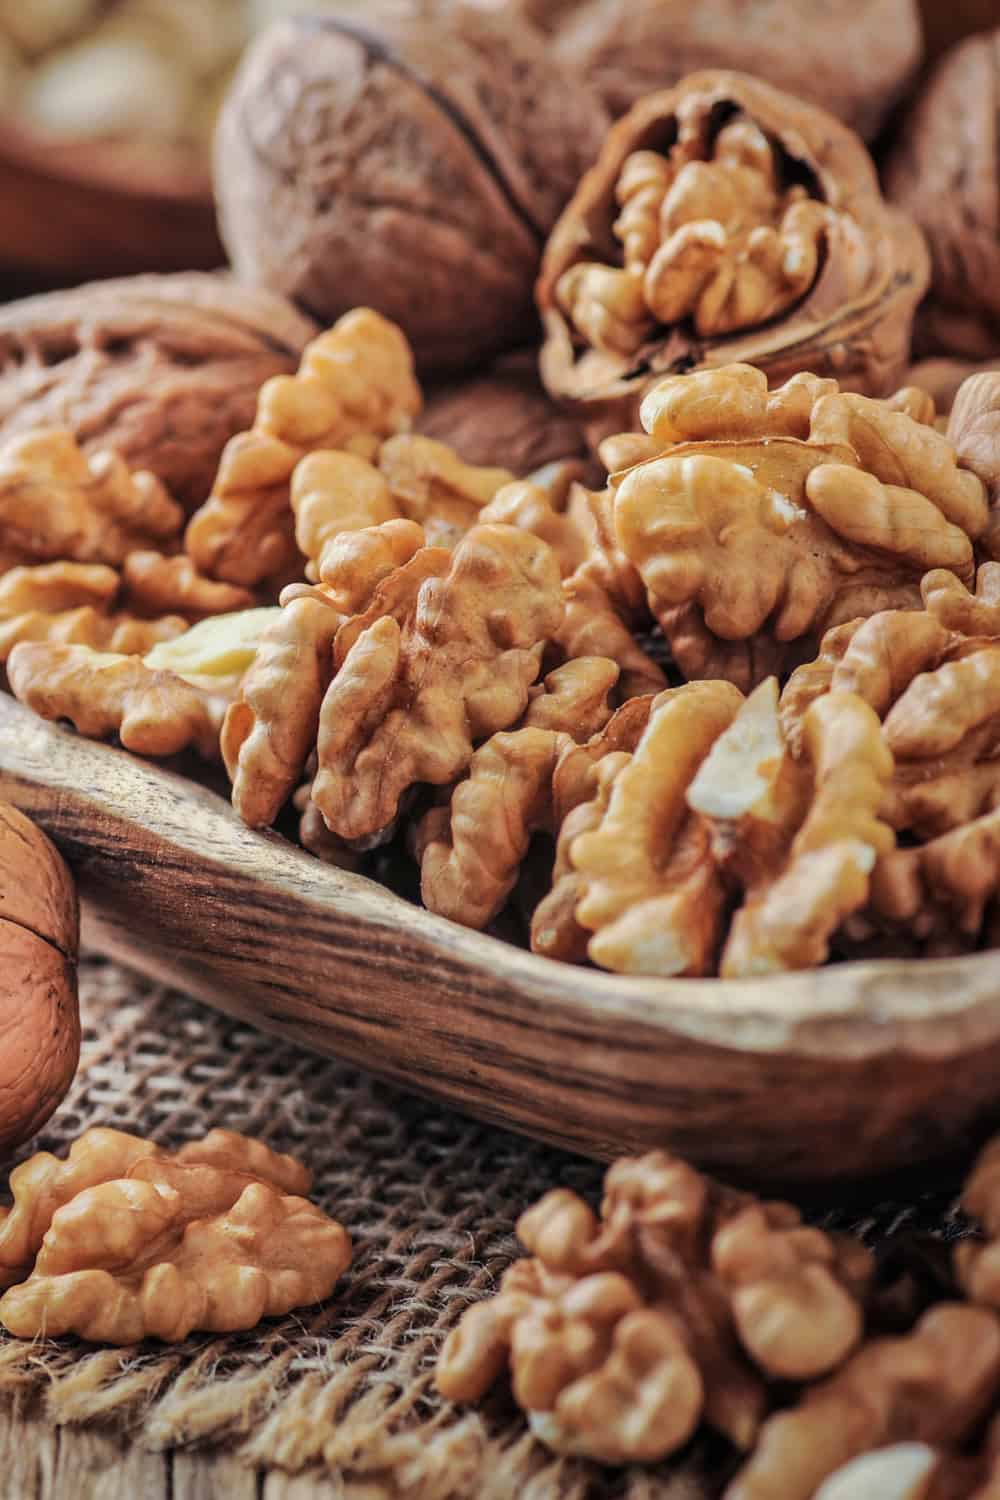 The Best Ways to Store Nuts and Seeds